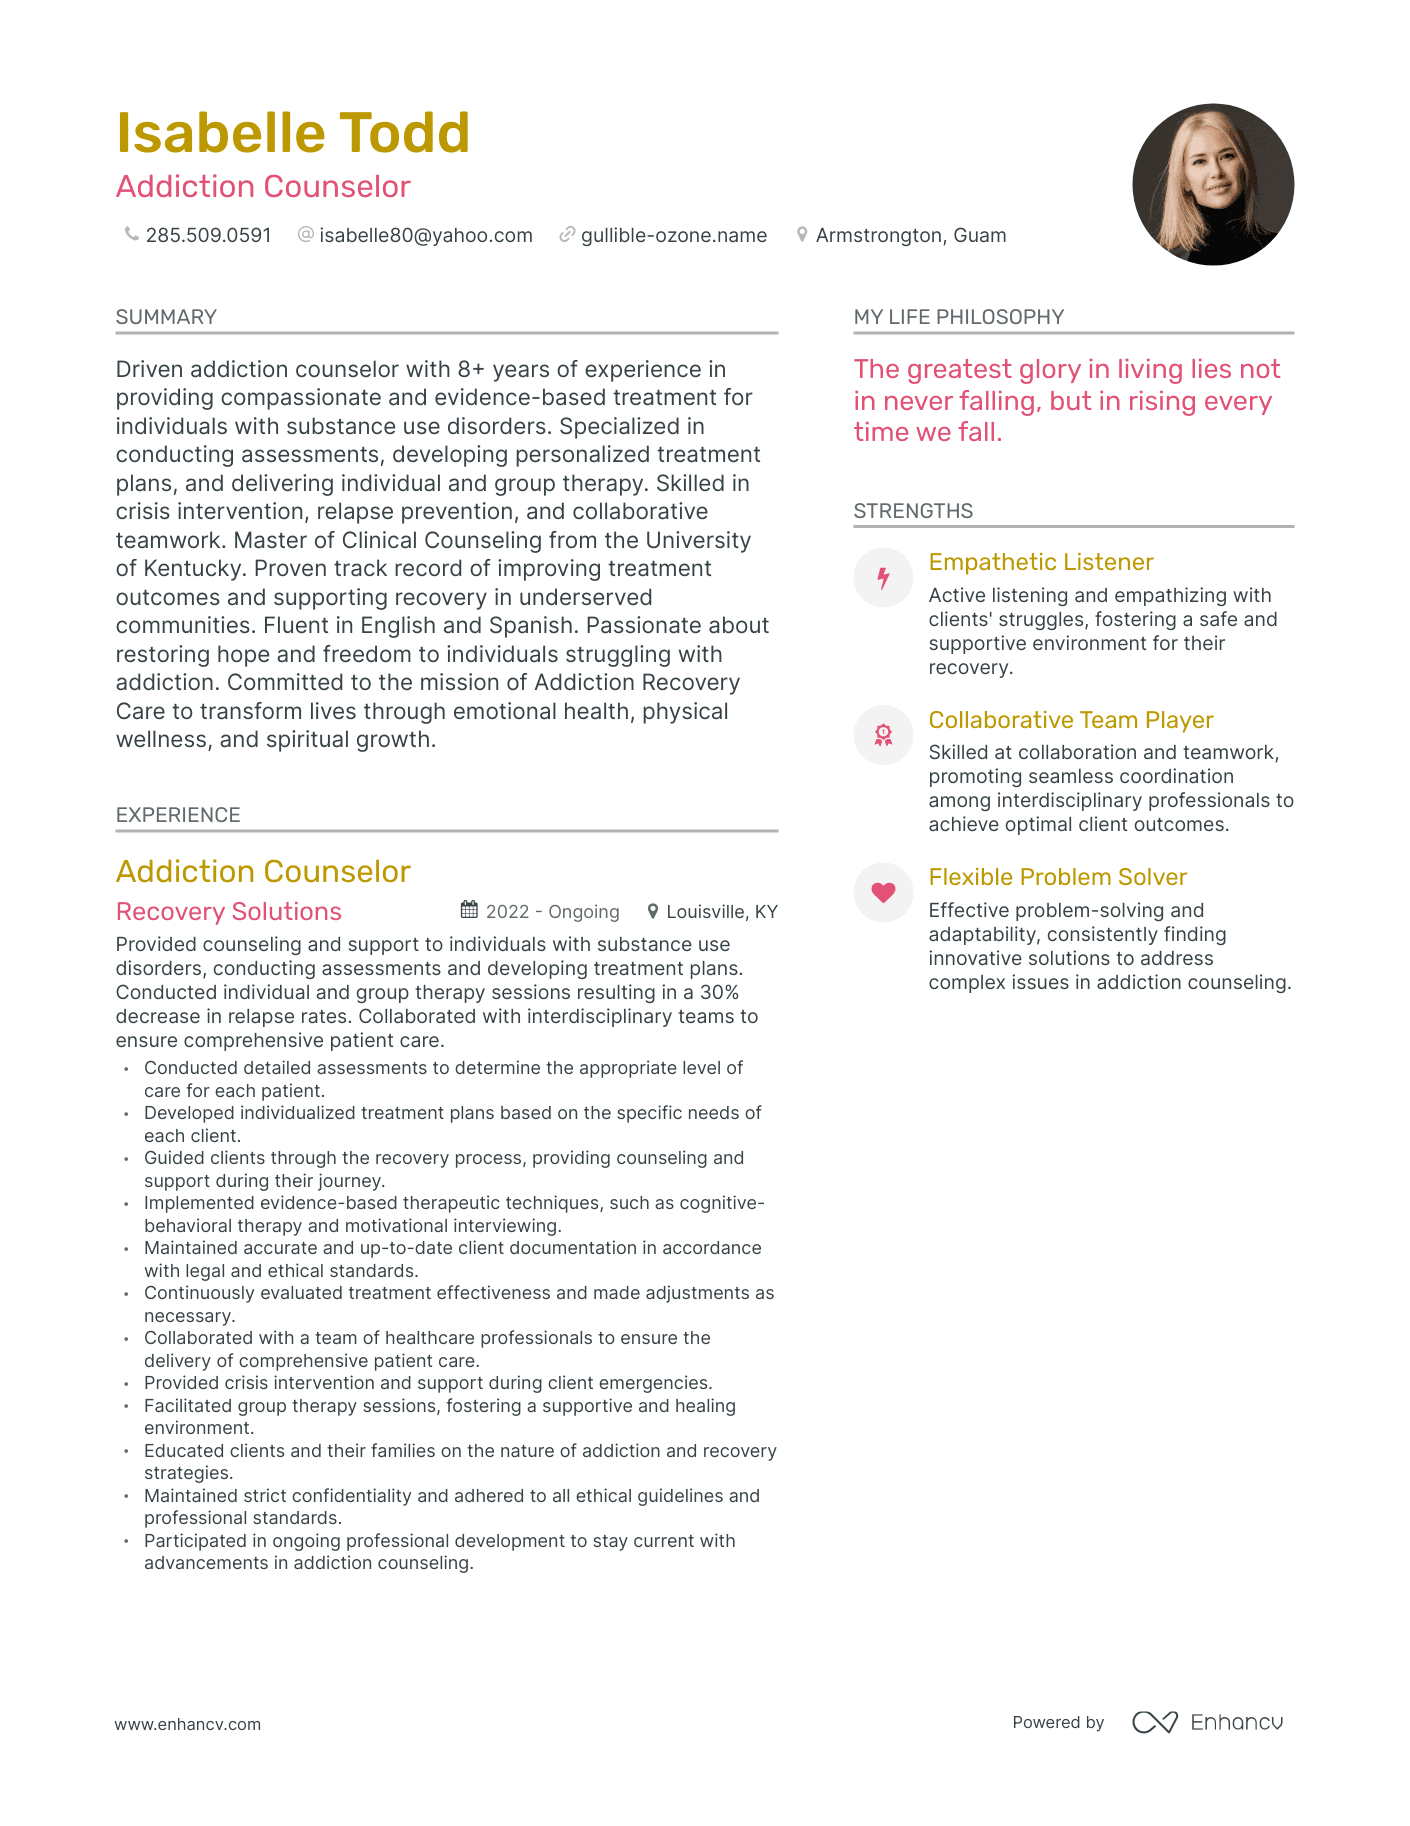 Addiction Counselor resume example